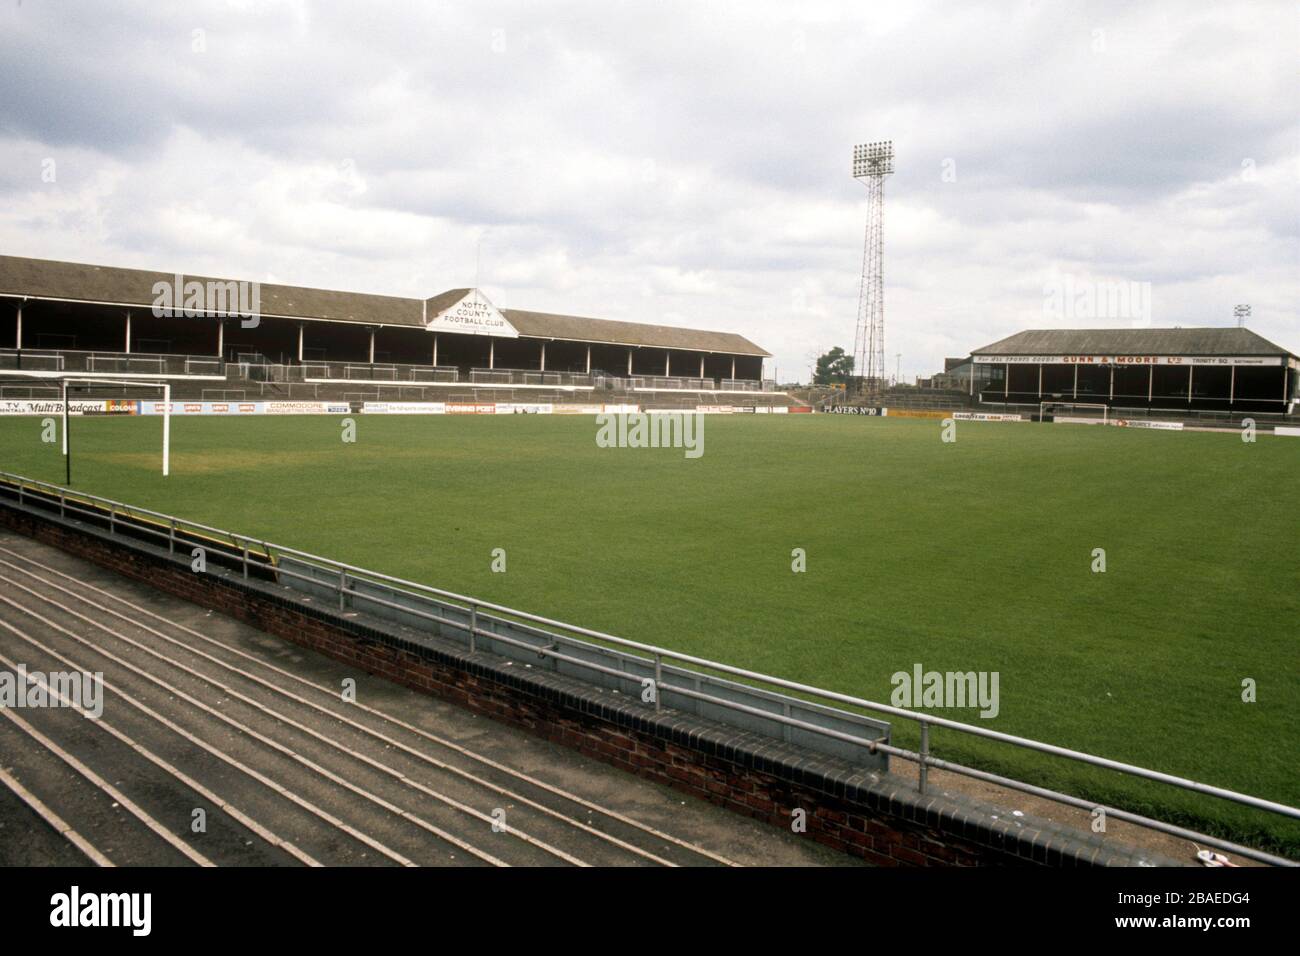 View of Meadow Lane, showing the County Road stand, built in 1923 and knocked down in 1992 and the Meadow Lane stand (r) which was brought over from Trent Bridge Cricket ground when the club moved to Meadow Lane in 1910. It was eventually knocked down in 1978. Stock Photo